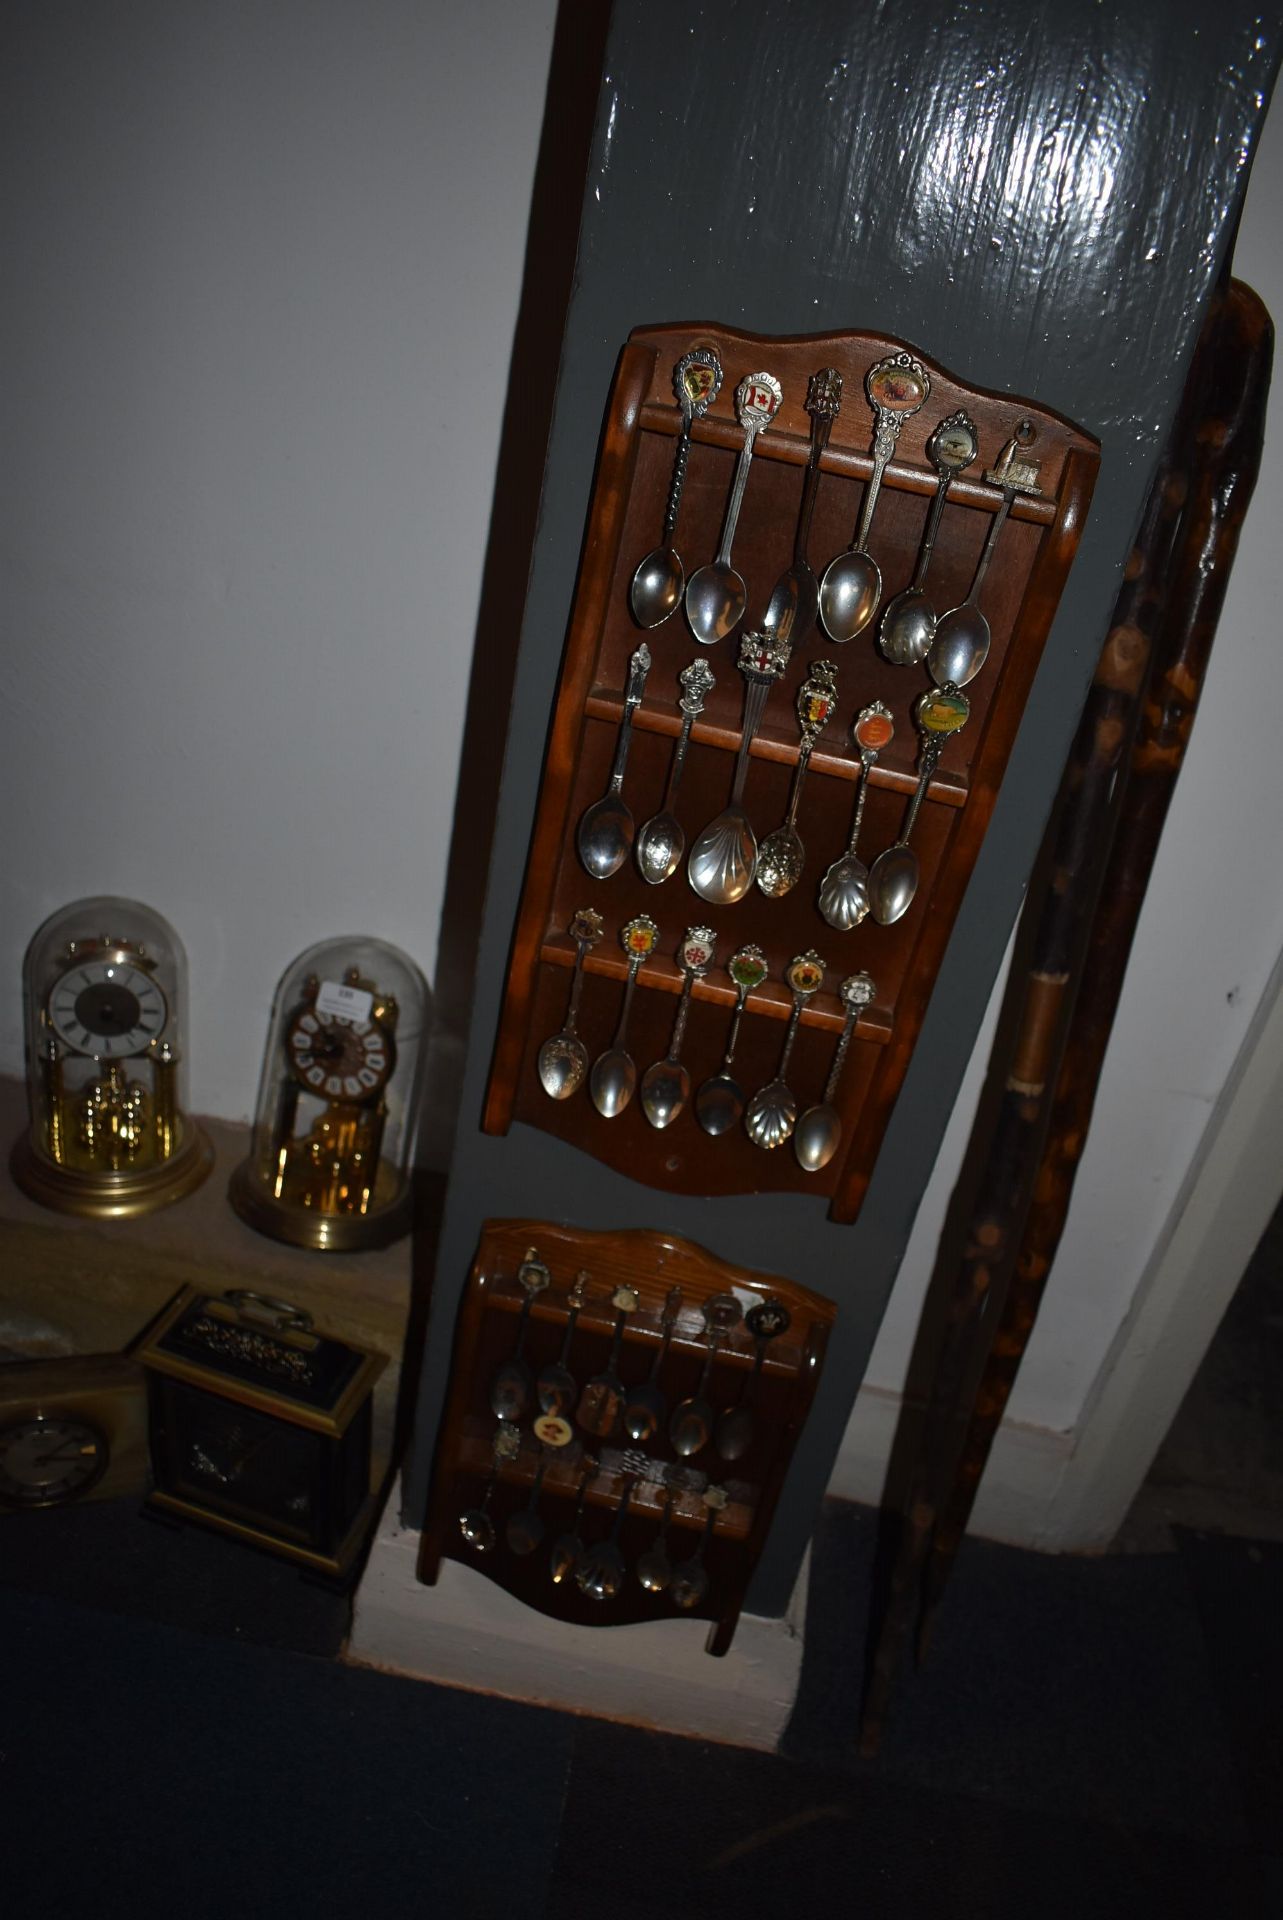 Quantity of Collectible Spoons in Display Shelves - Image 2 of 2